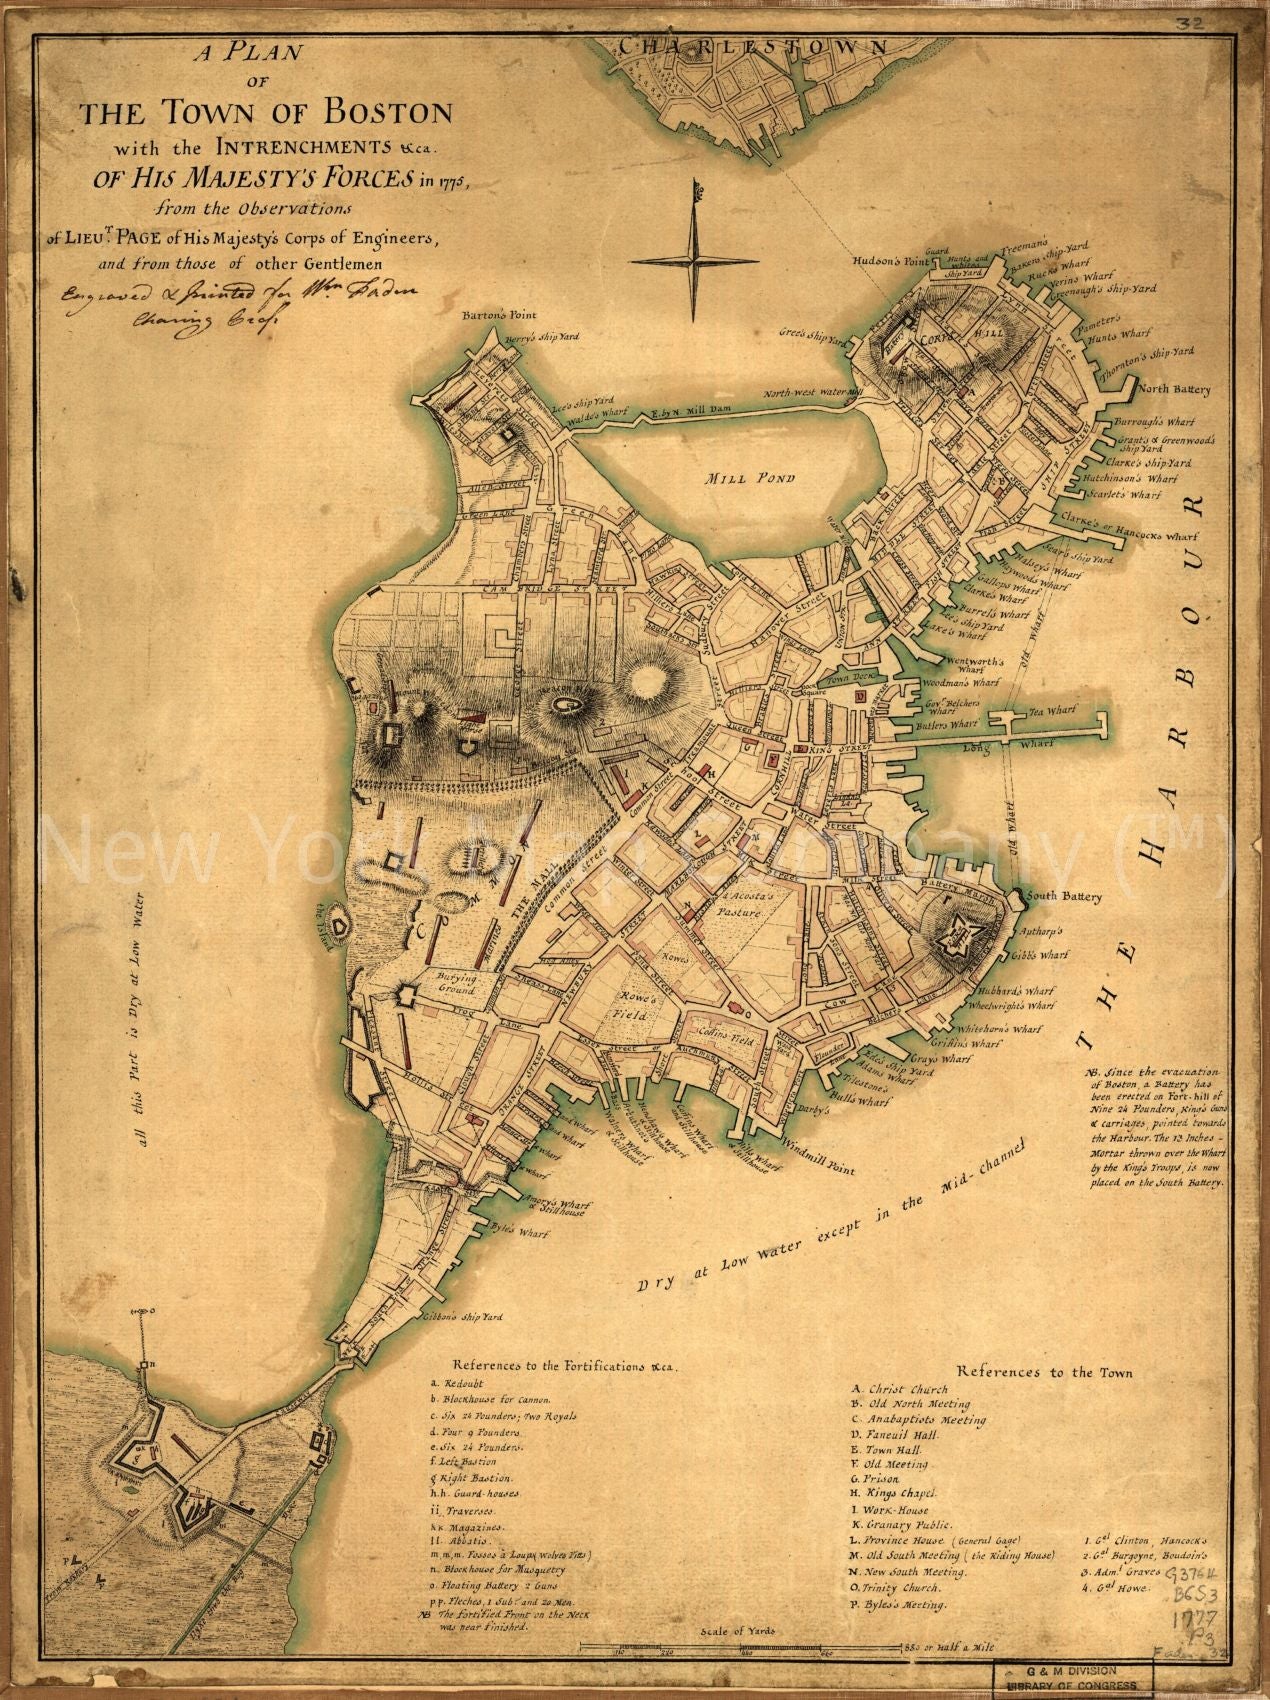 1777 map A plan of the town of Boston with the intrenchments andca. of His Majesty's forces in 1775, from the observations of Lieut. Page of His Majesty's Corps of Engineers, and from those of other gentlemen. N.B. Since the evacuation of Boston .. Map S